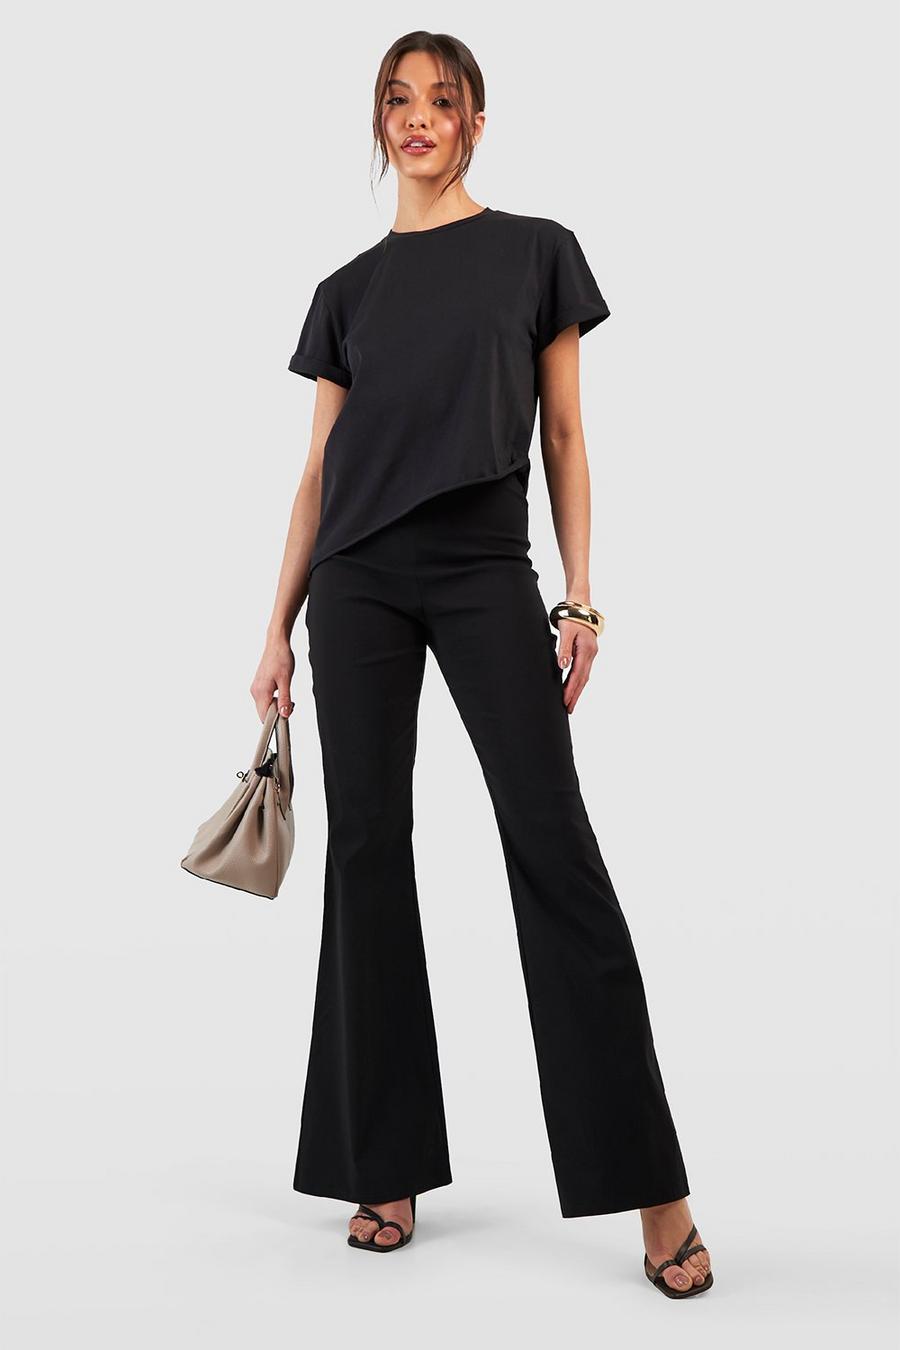 Black Super Stretch Fit & Flare Tailored Pants